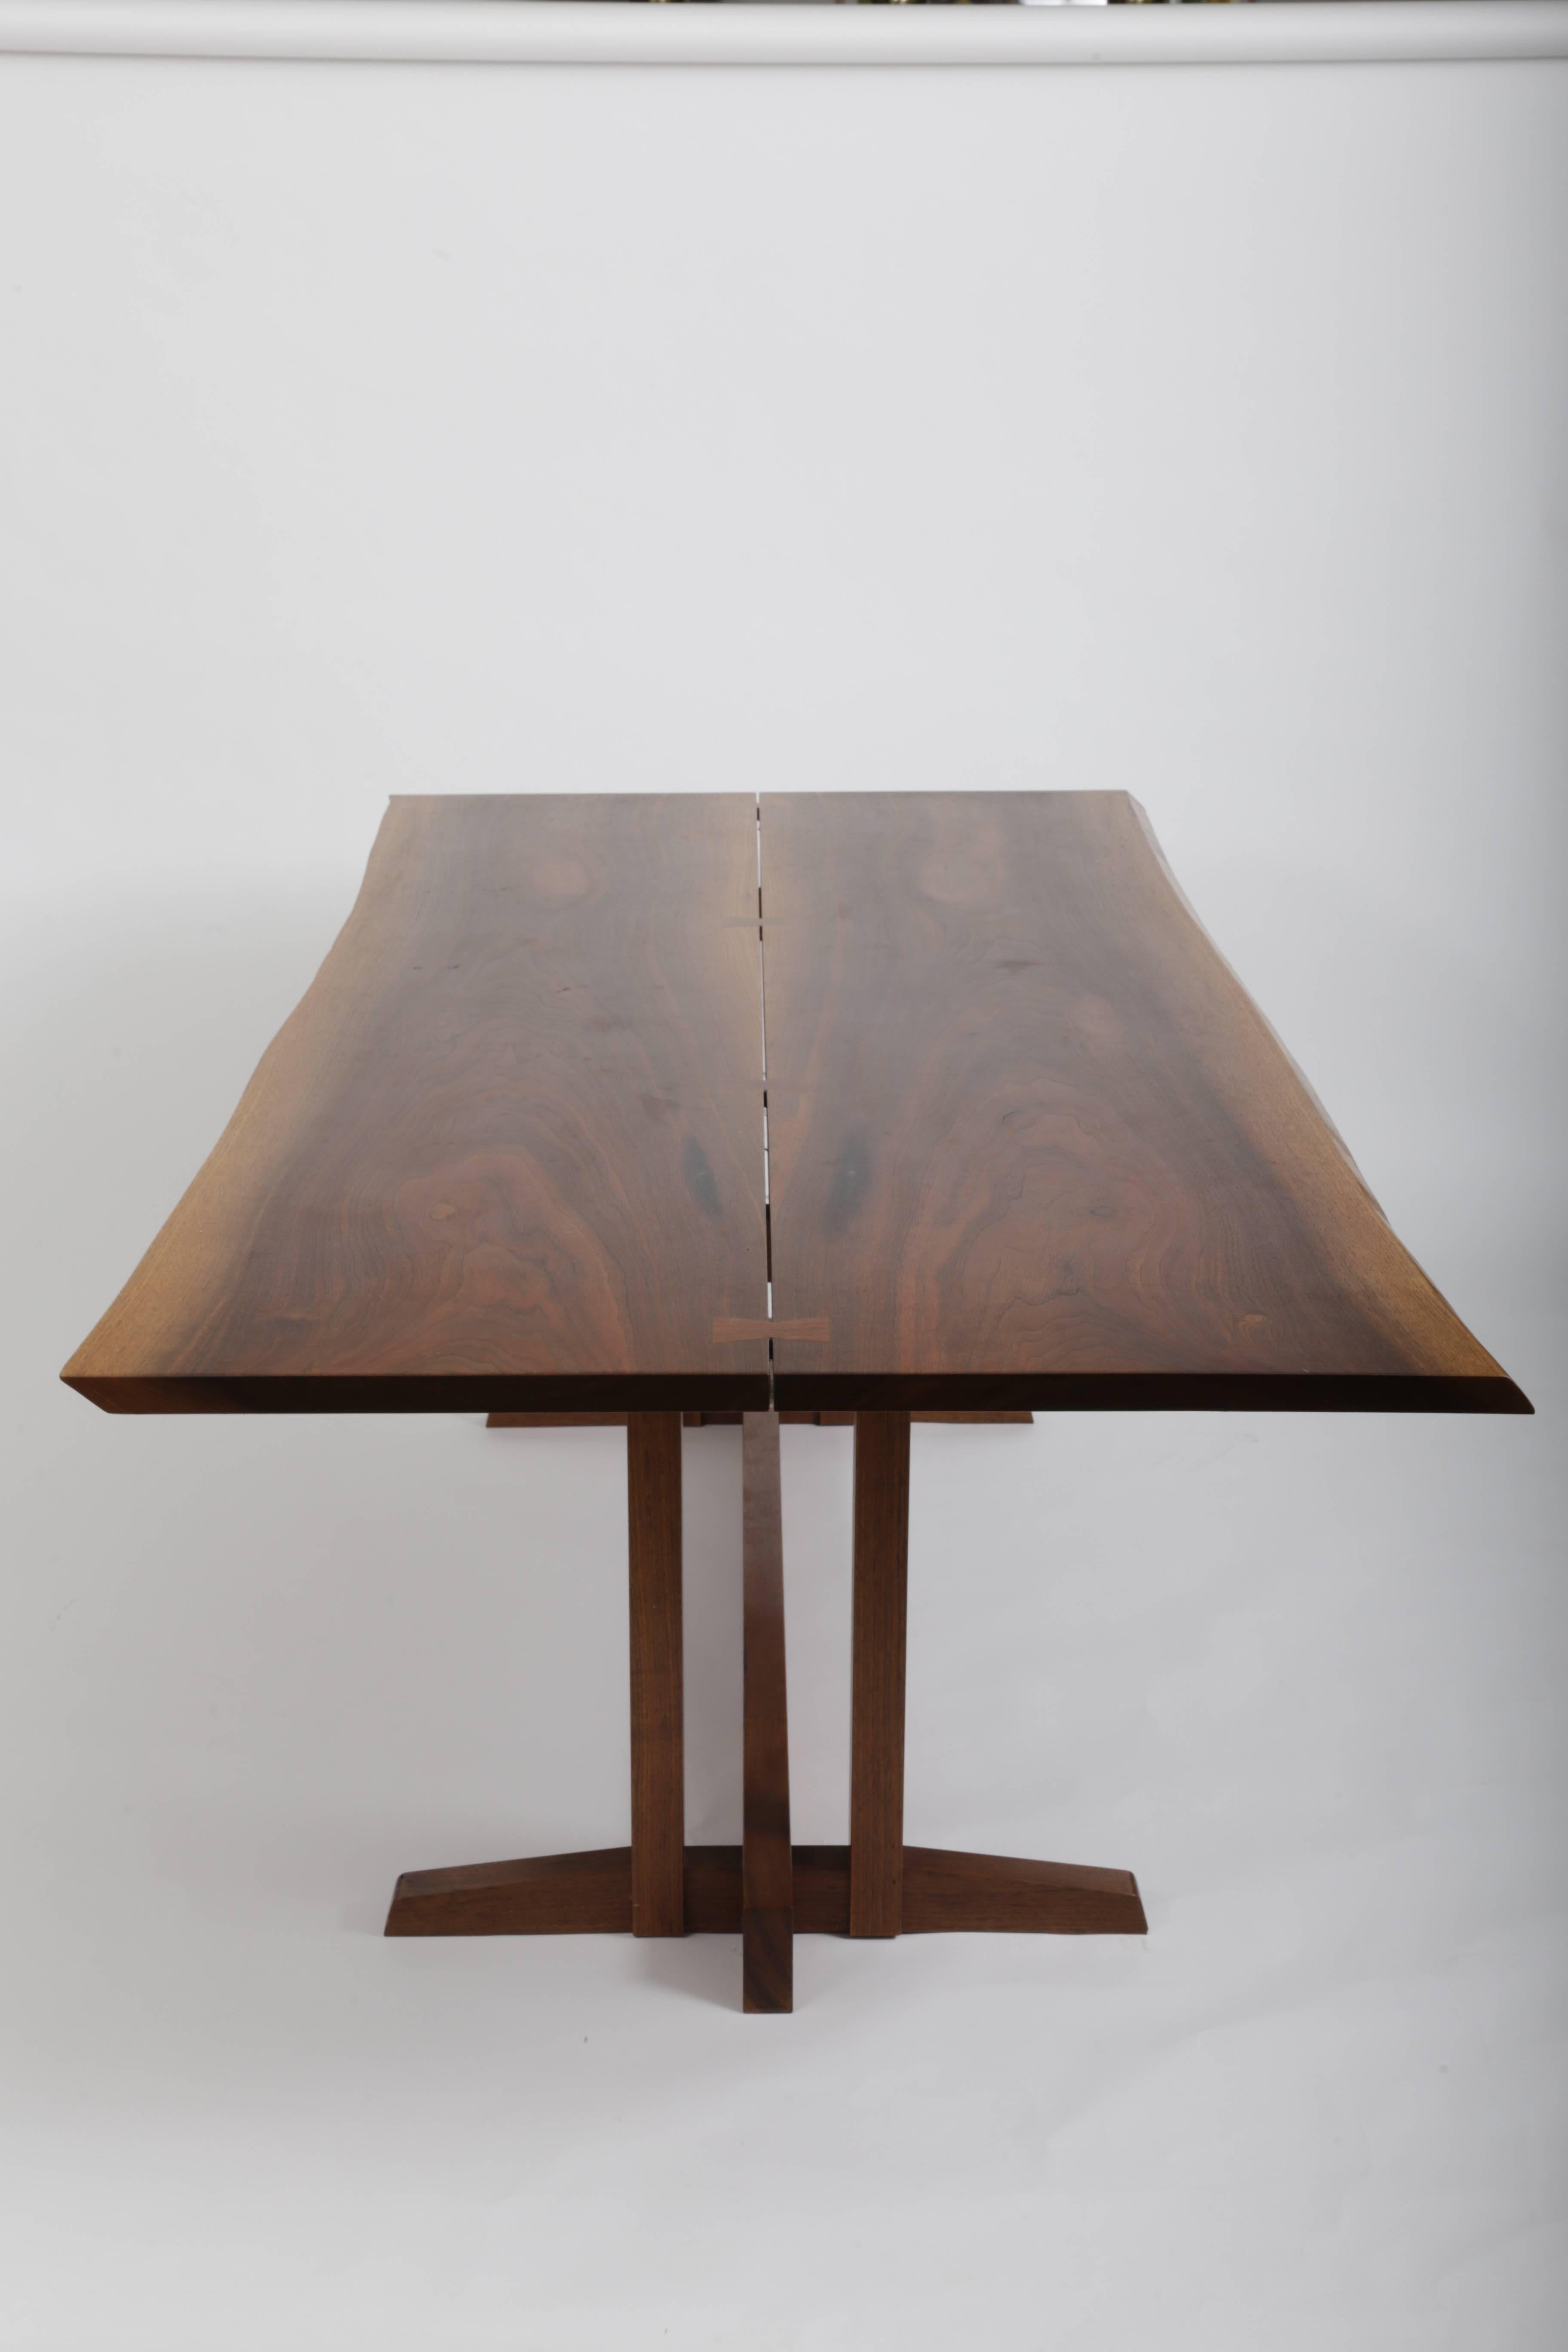 A wonderful bookmatched slabs of walnut joined by Walnut Butterflies,
Thick free edge top with great grain pattern,
Table is signed by Nakashima.